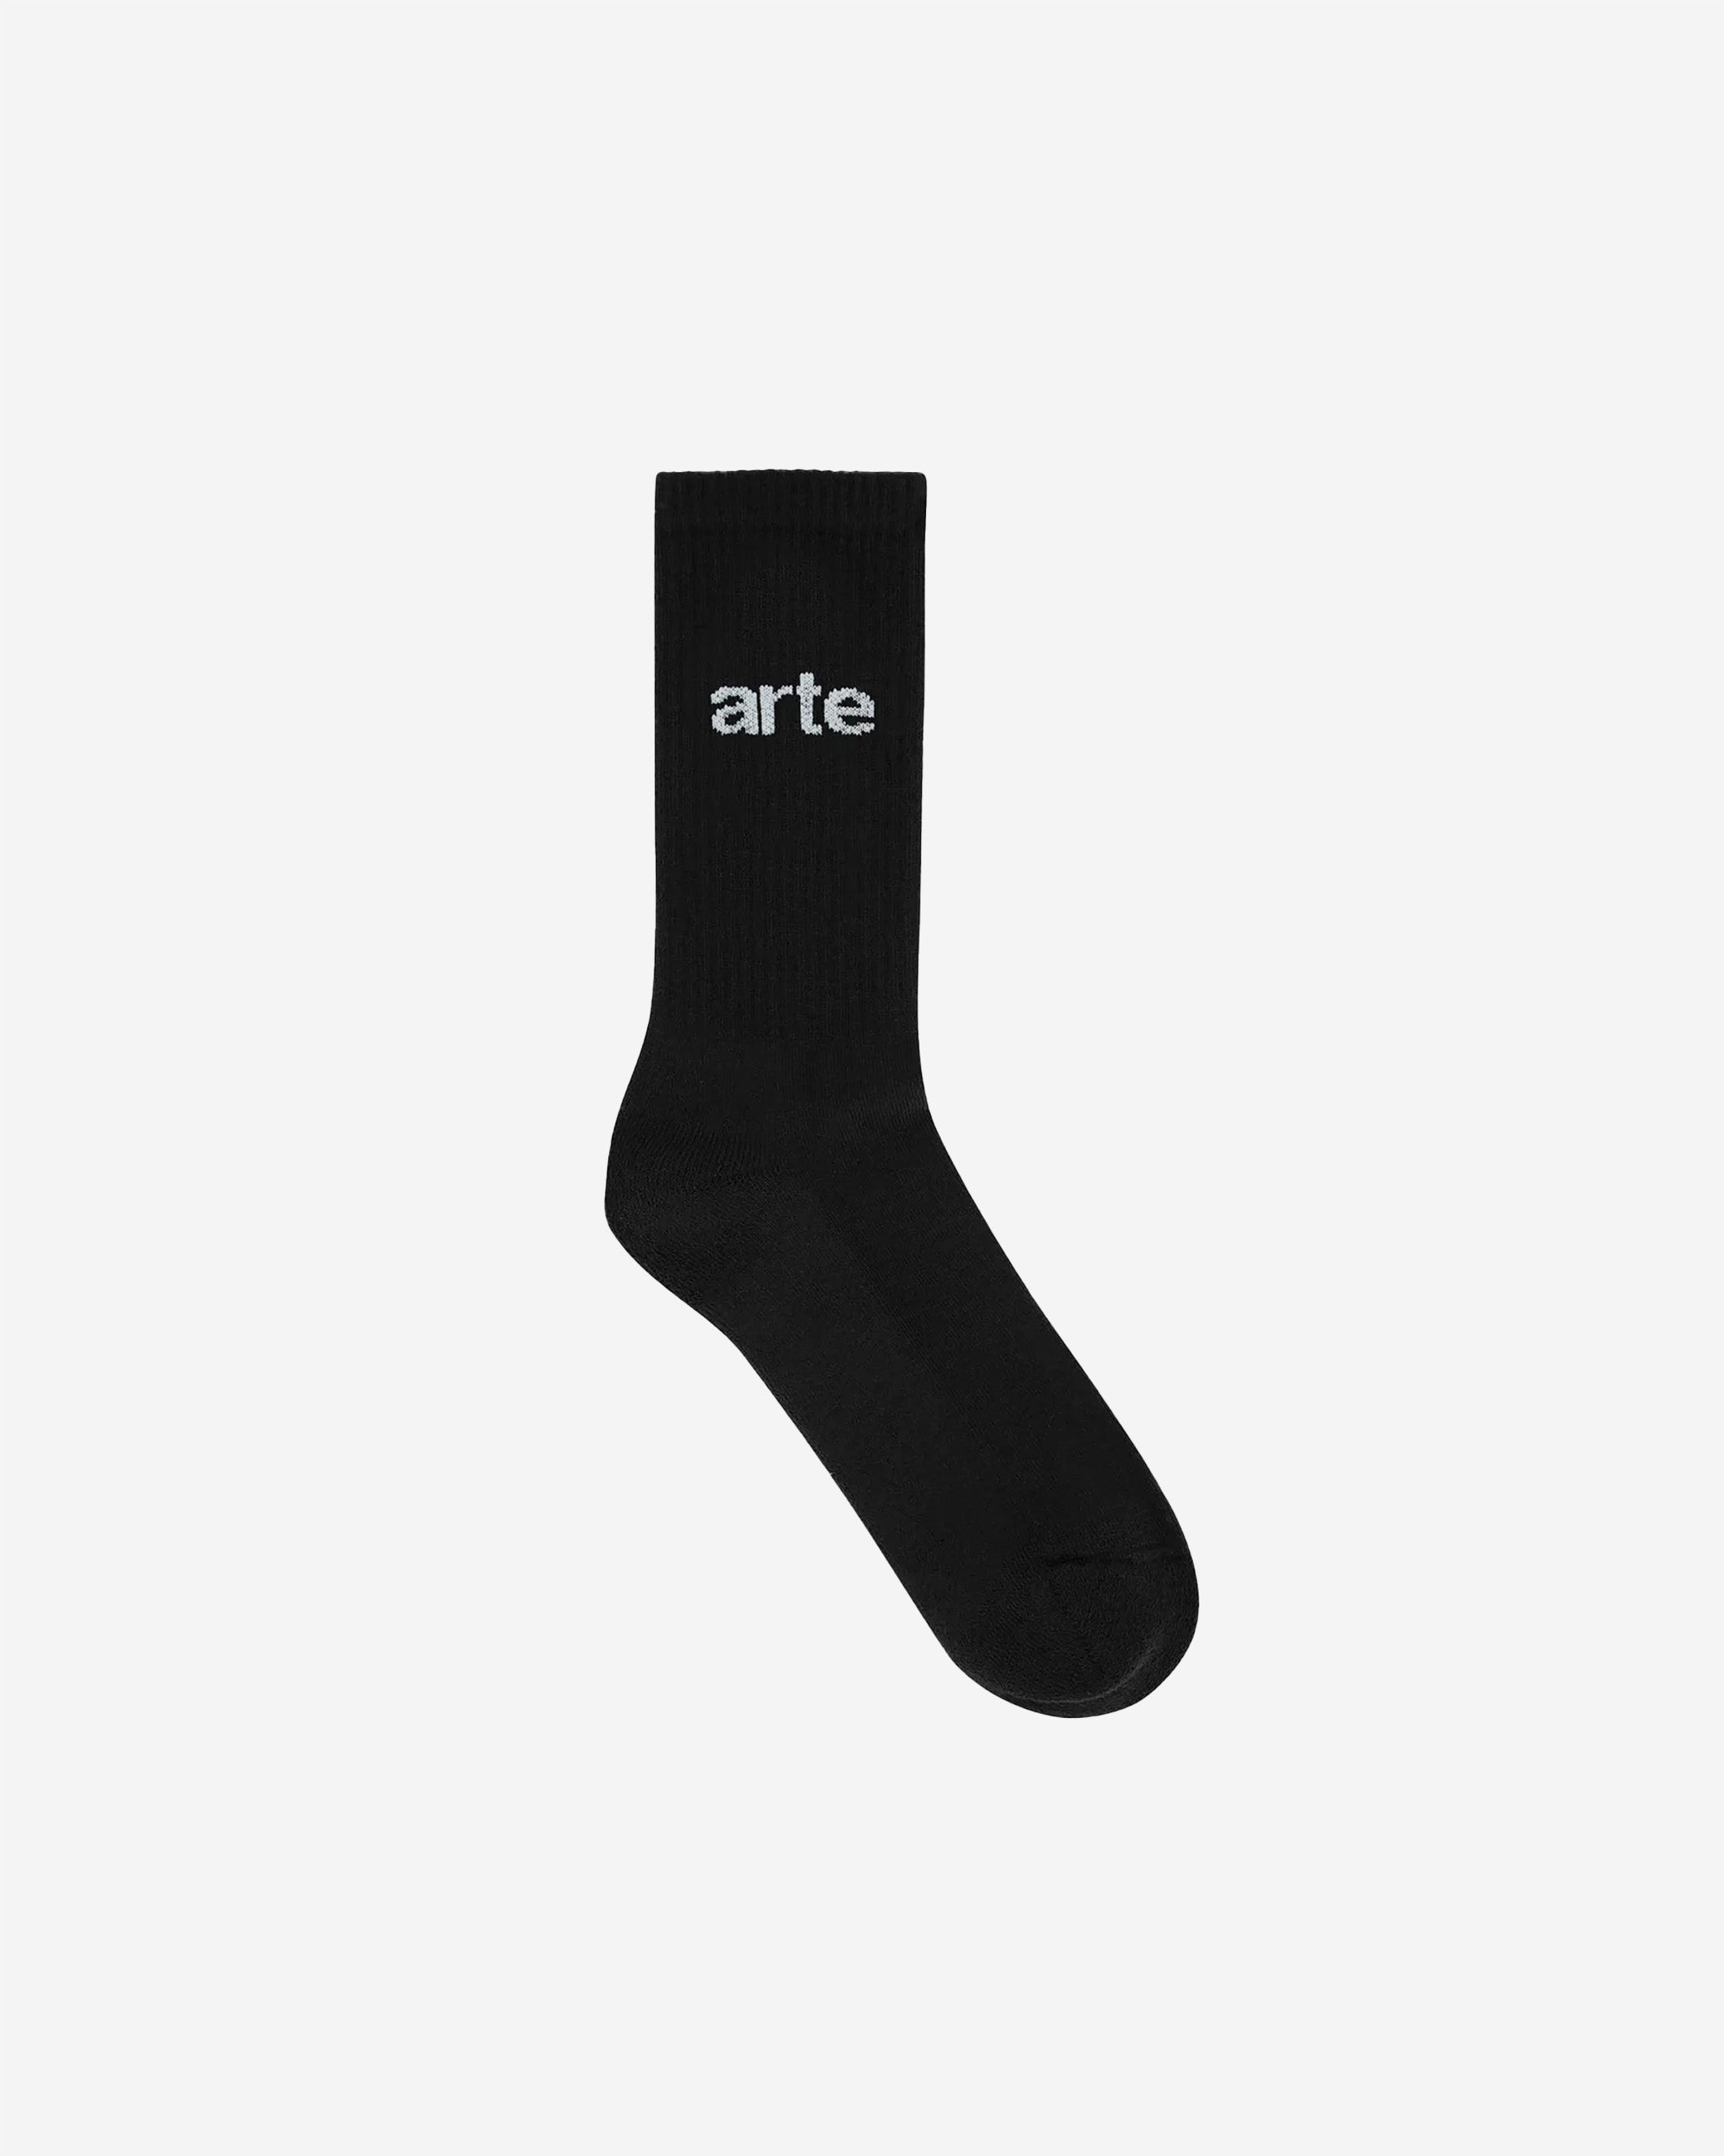 The Arte Logo Socks have comfort at their core. This pair is cut from a stretchy cotton mix to provide a fresh feeling from day to night. Made in a one-size-fits-all, the ribbed socks are topped off with a vertical arte logo.